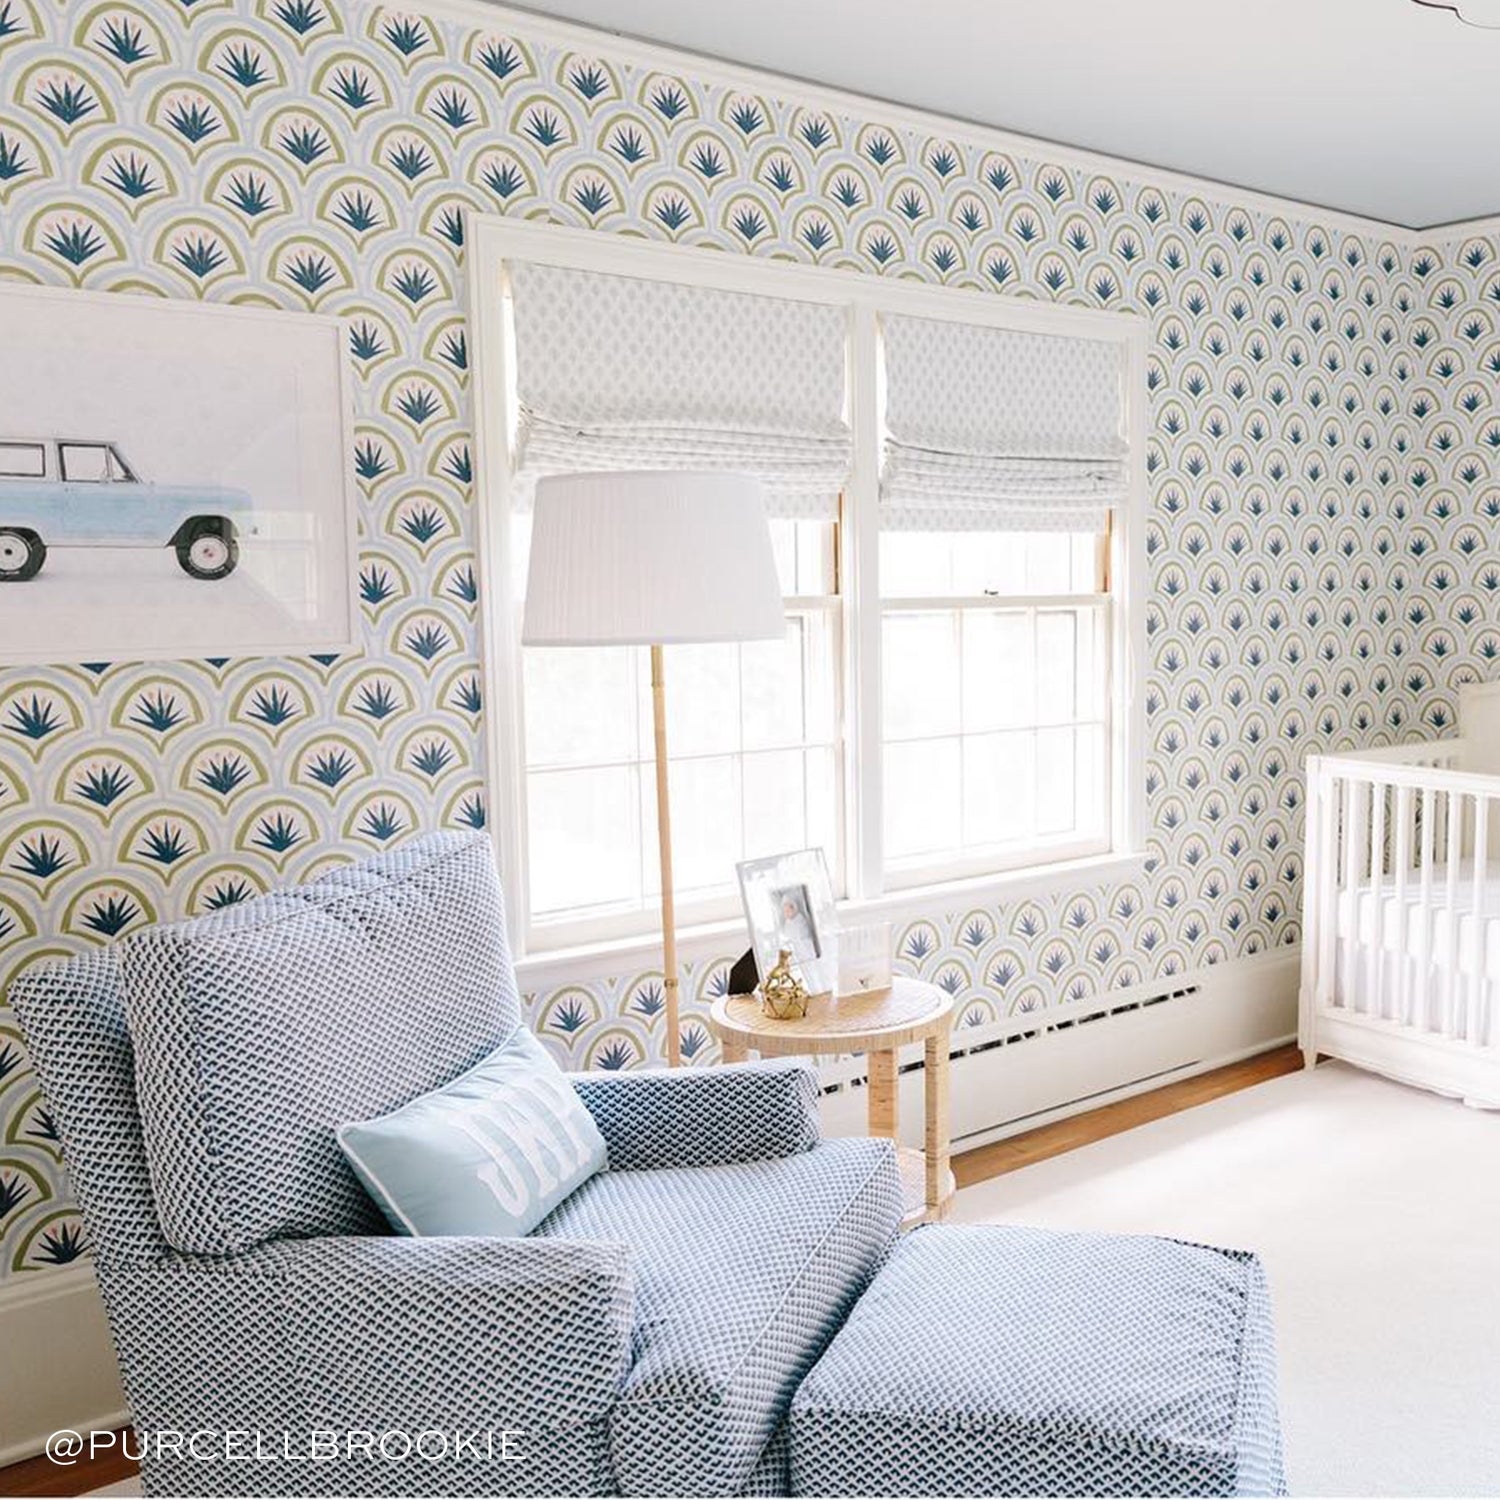 Nursery room styled with Art Deco Palm Pattern Printed Wallpaper by illuminated window next to white sofa chair with monogrammed pillow. Photo taken by Purcell Brookie